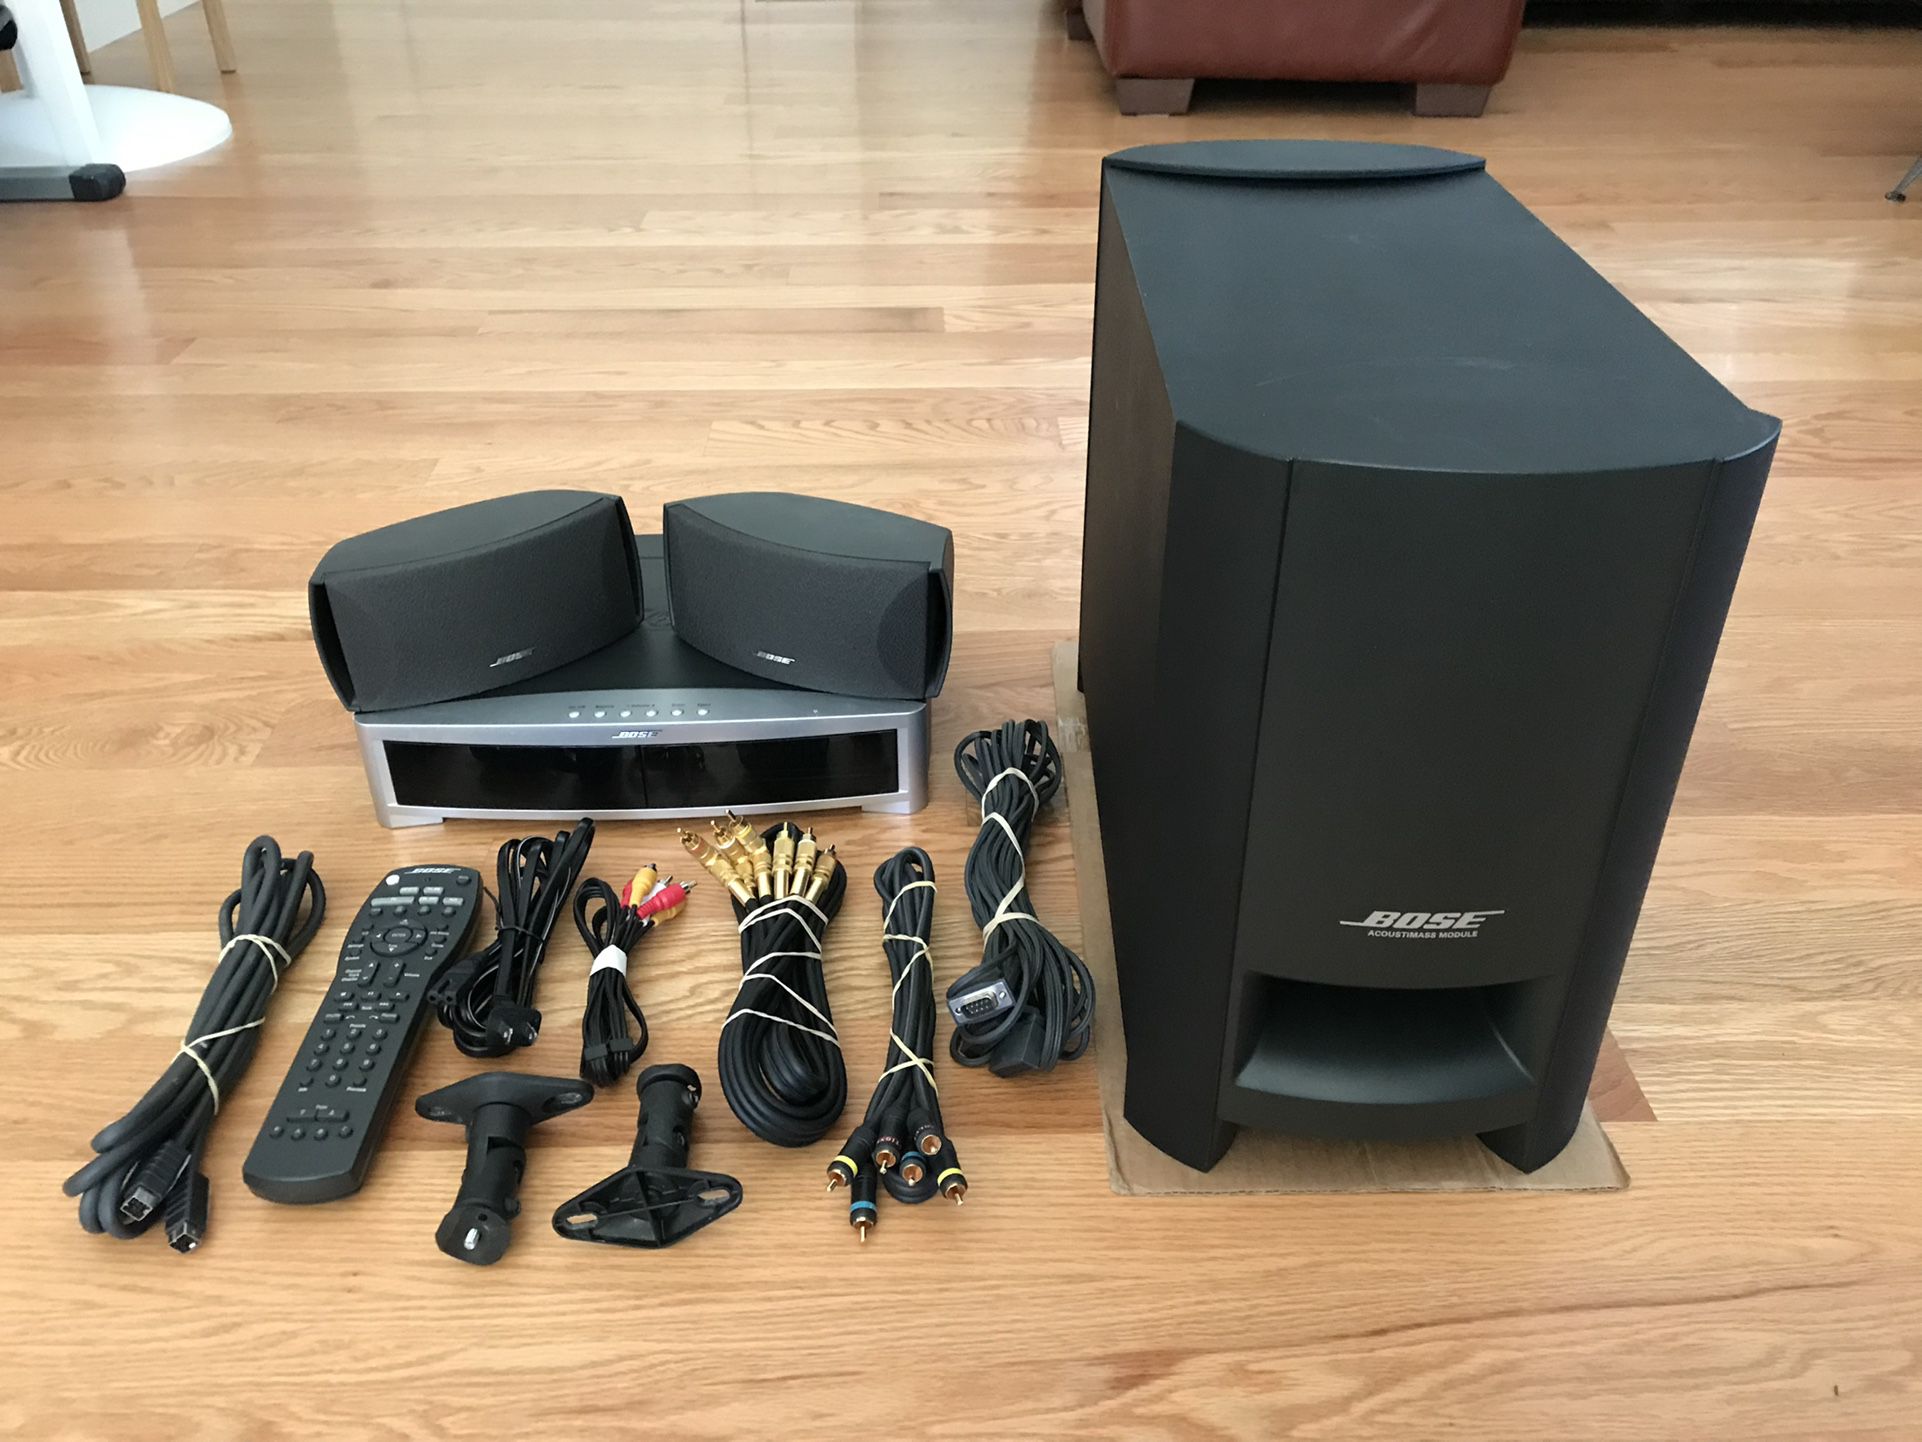 Bose ps 3-2-1 series II Full Set Excellent Louder Bass sound Great , Play DVD&CD Radio AM&FM 